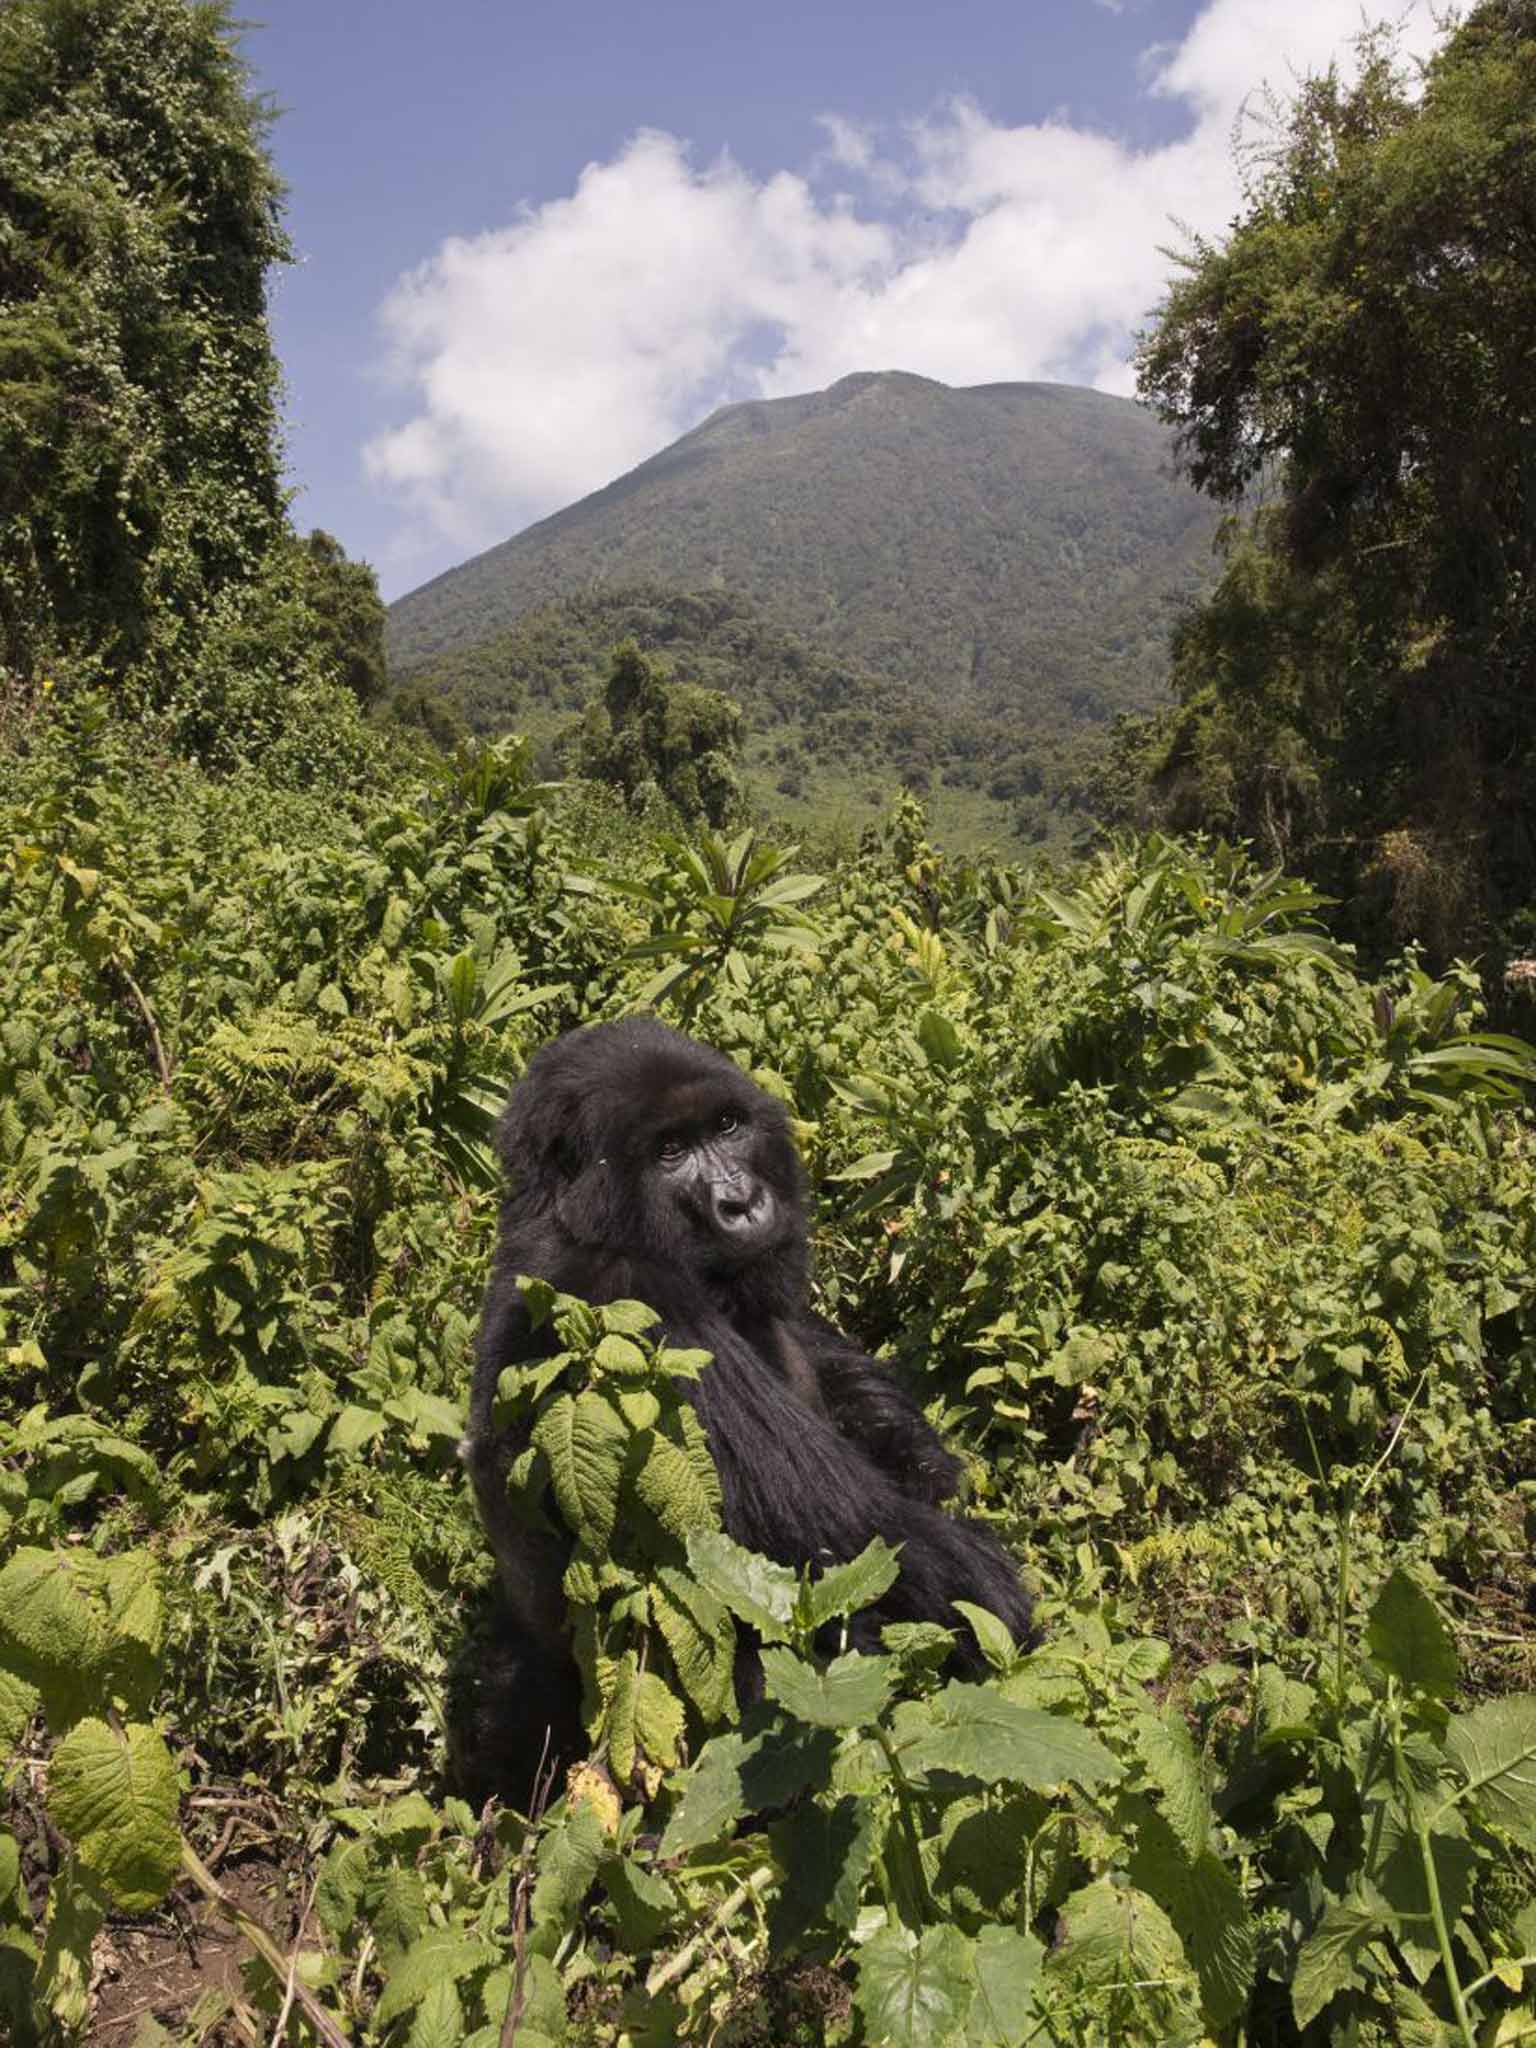 The mountain gorilla, a critically endangered primate that shares 98 per cent of its DNA with us